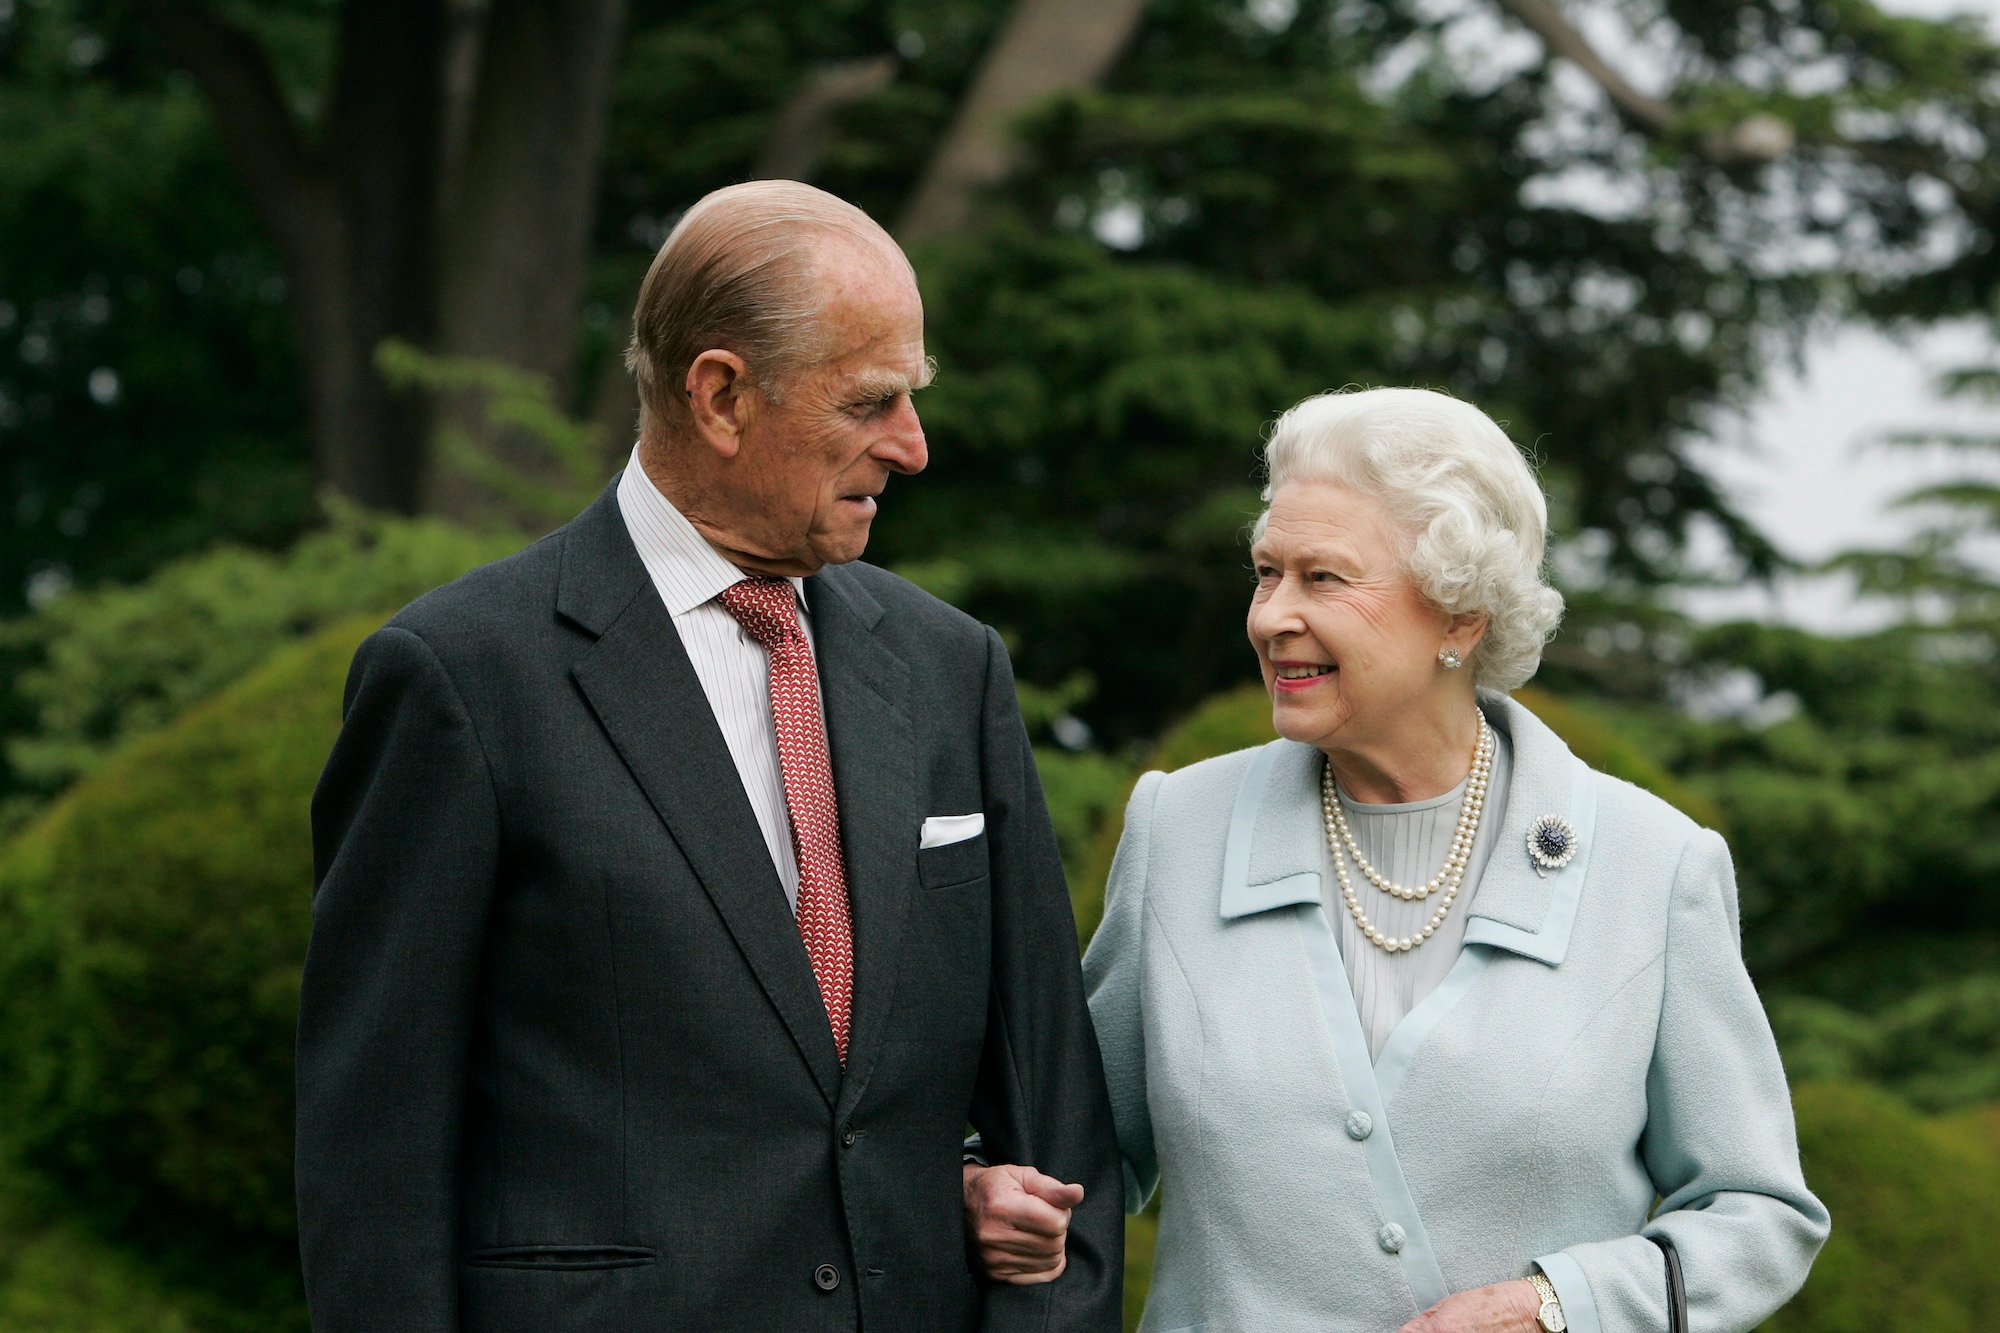 Prince Philip and Queen Elizabeth smiling at each other in front of blurred trees, 2007